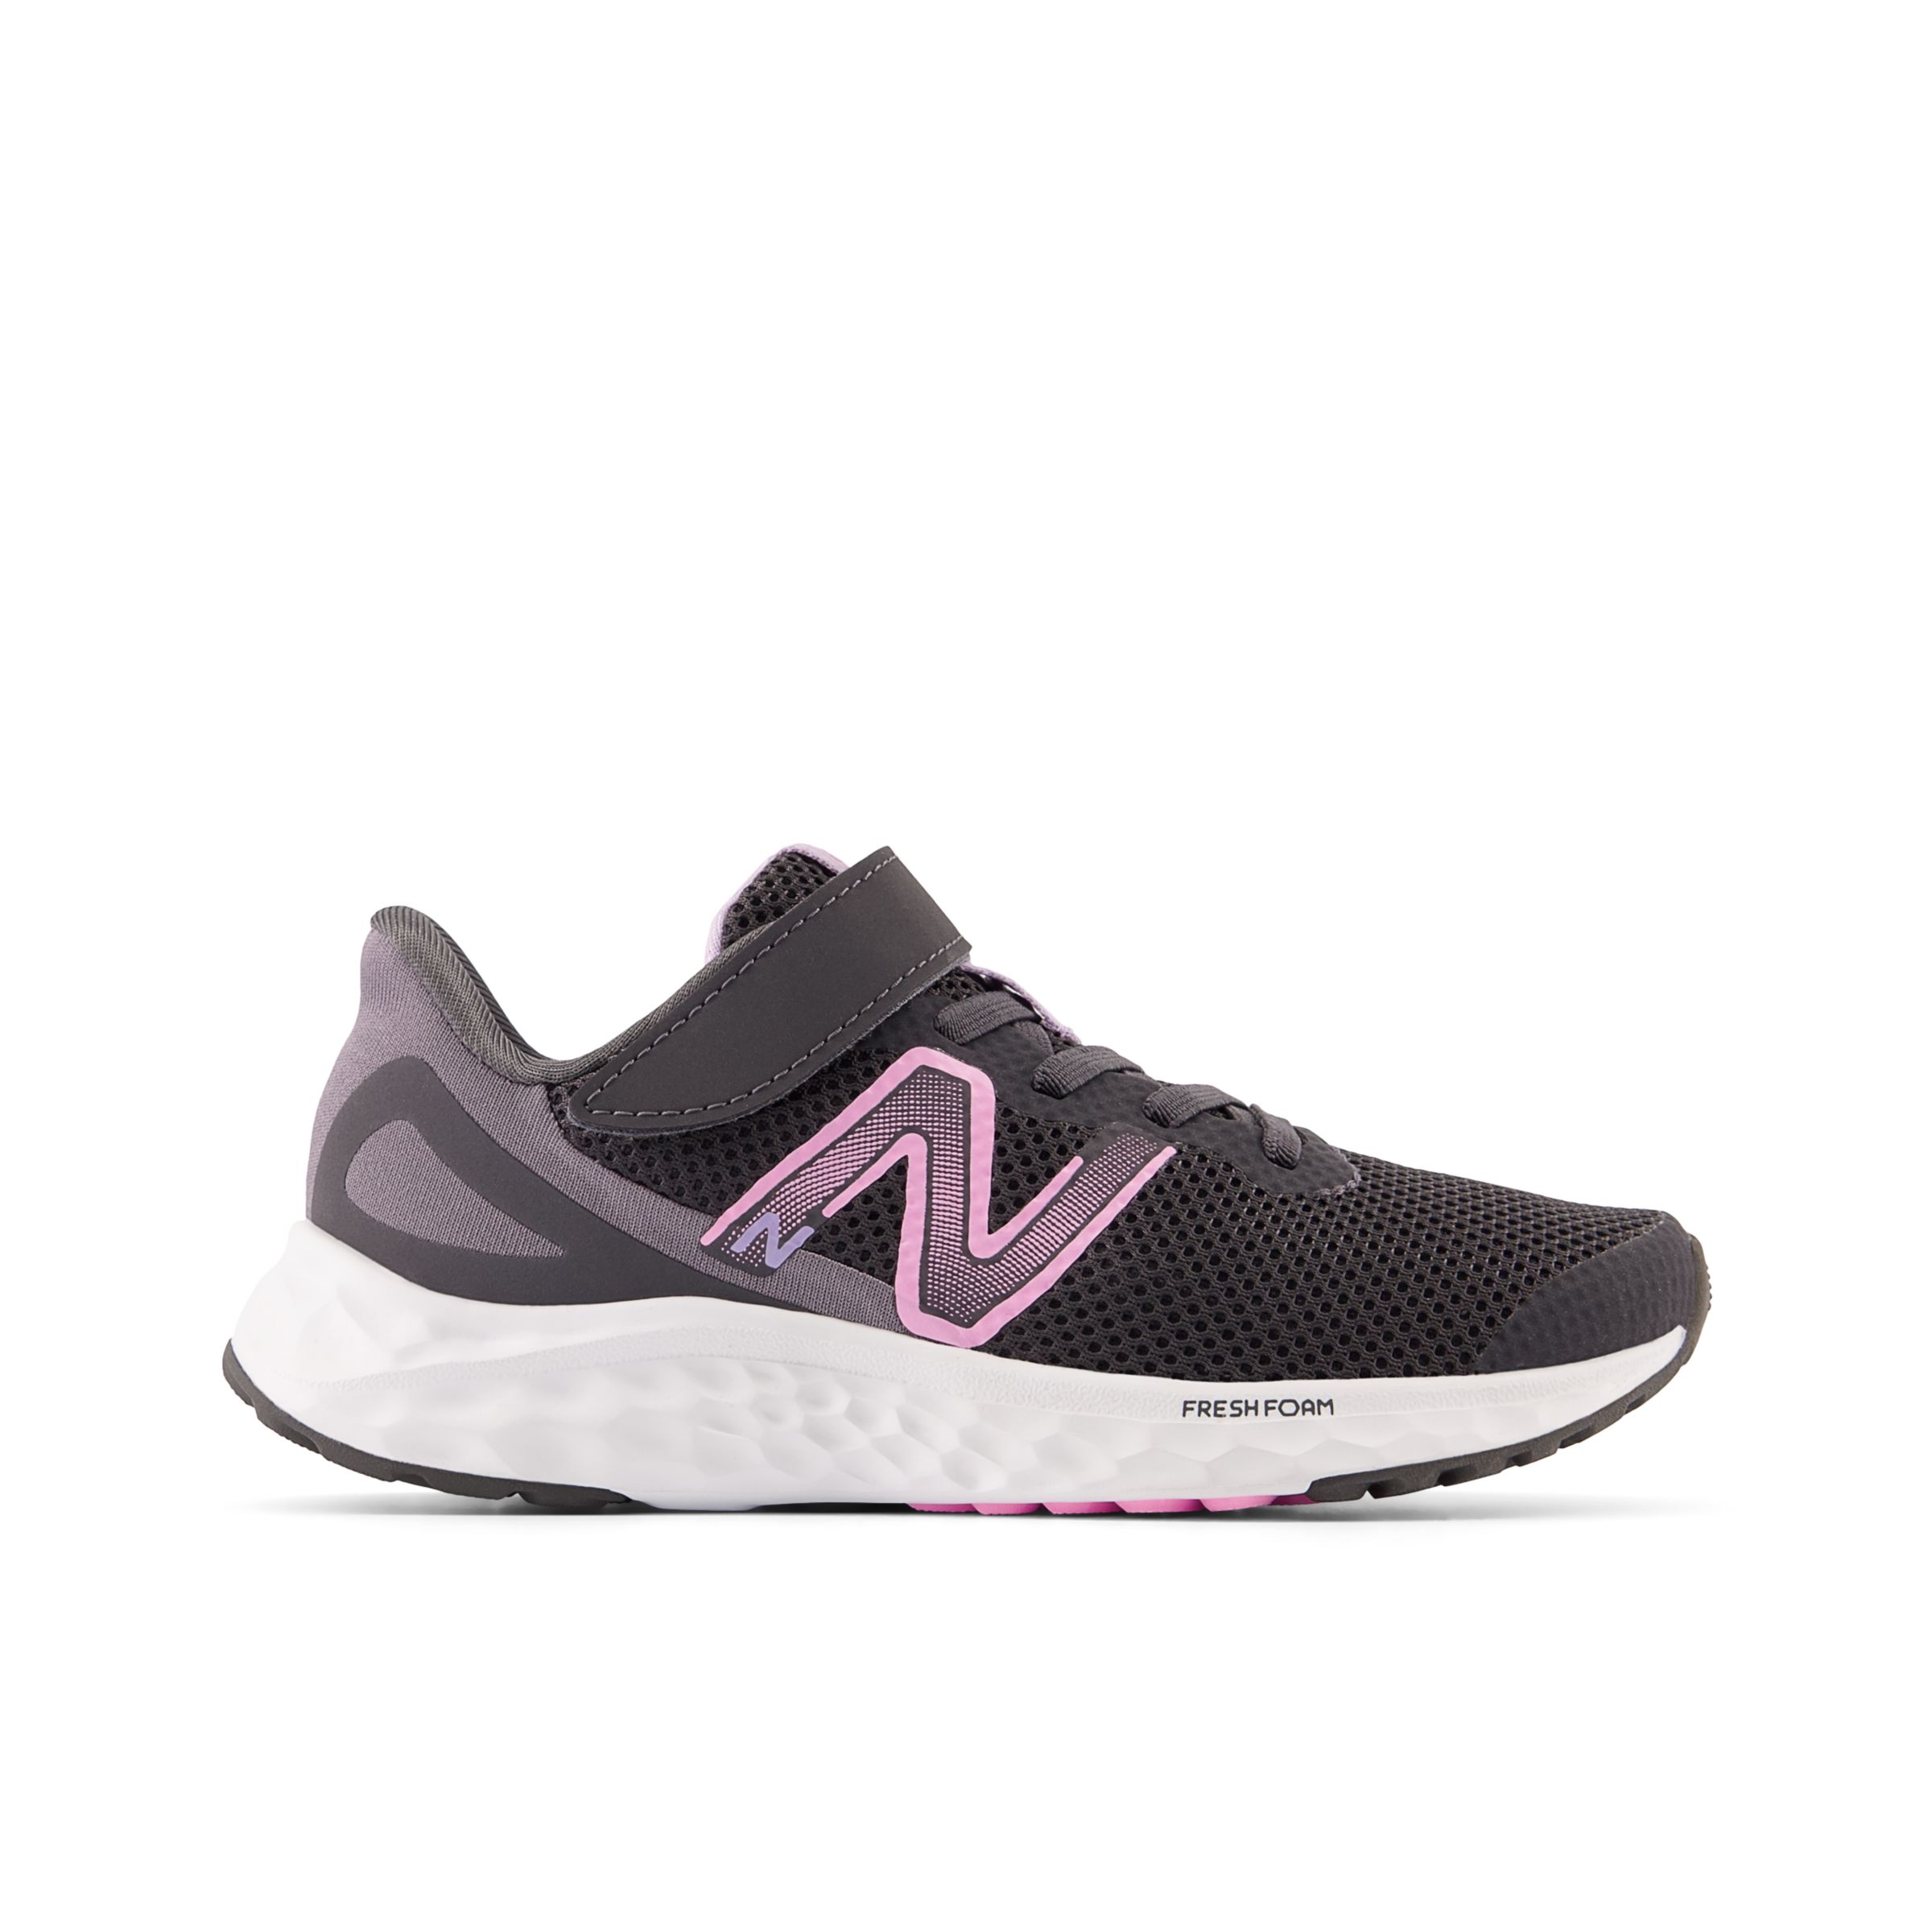 New Balance Enfant Fresh Foam Arishi v4 Bungee Lace with Top Strap en Gris/Rose/Mauve, Synthetic, Taille 29